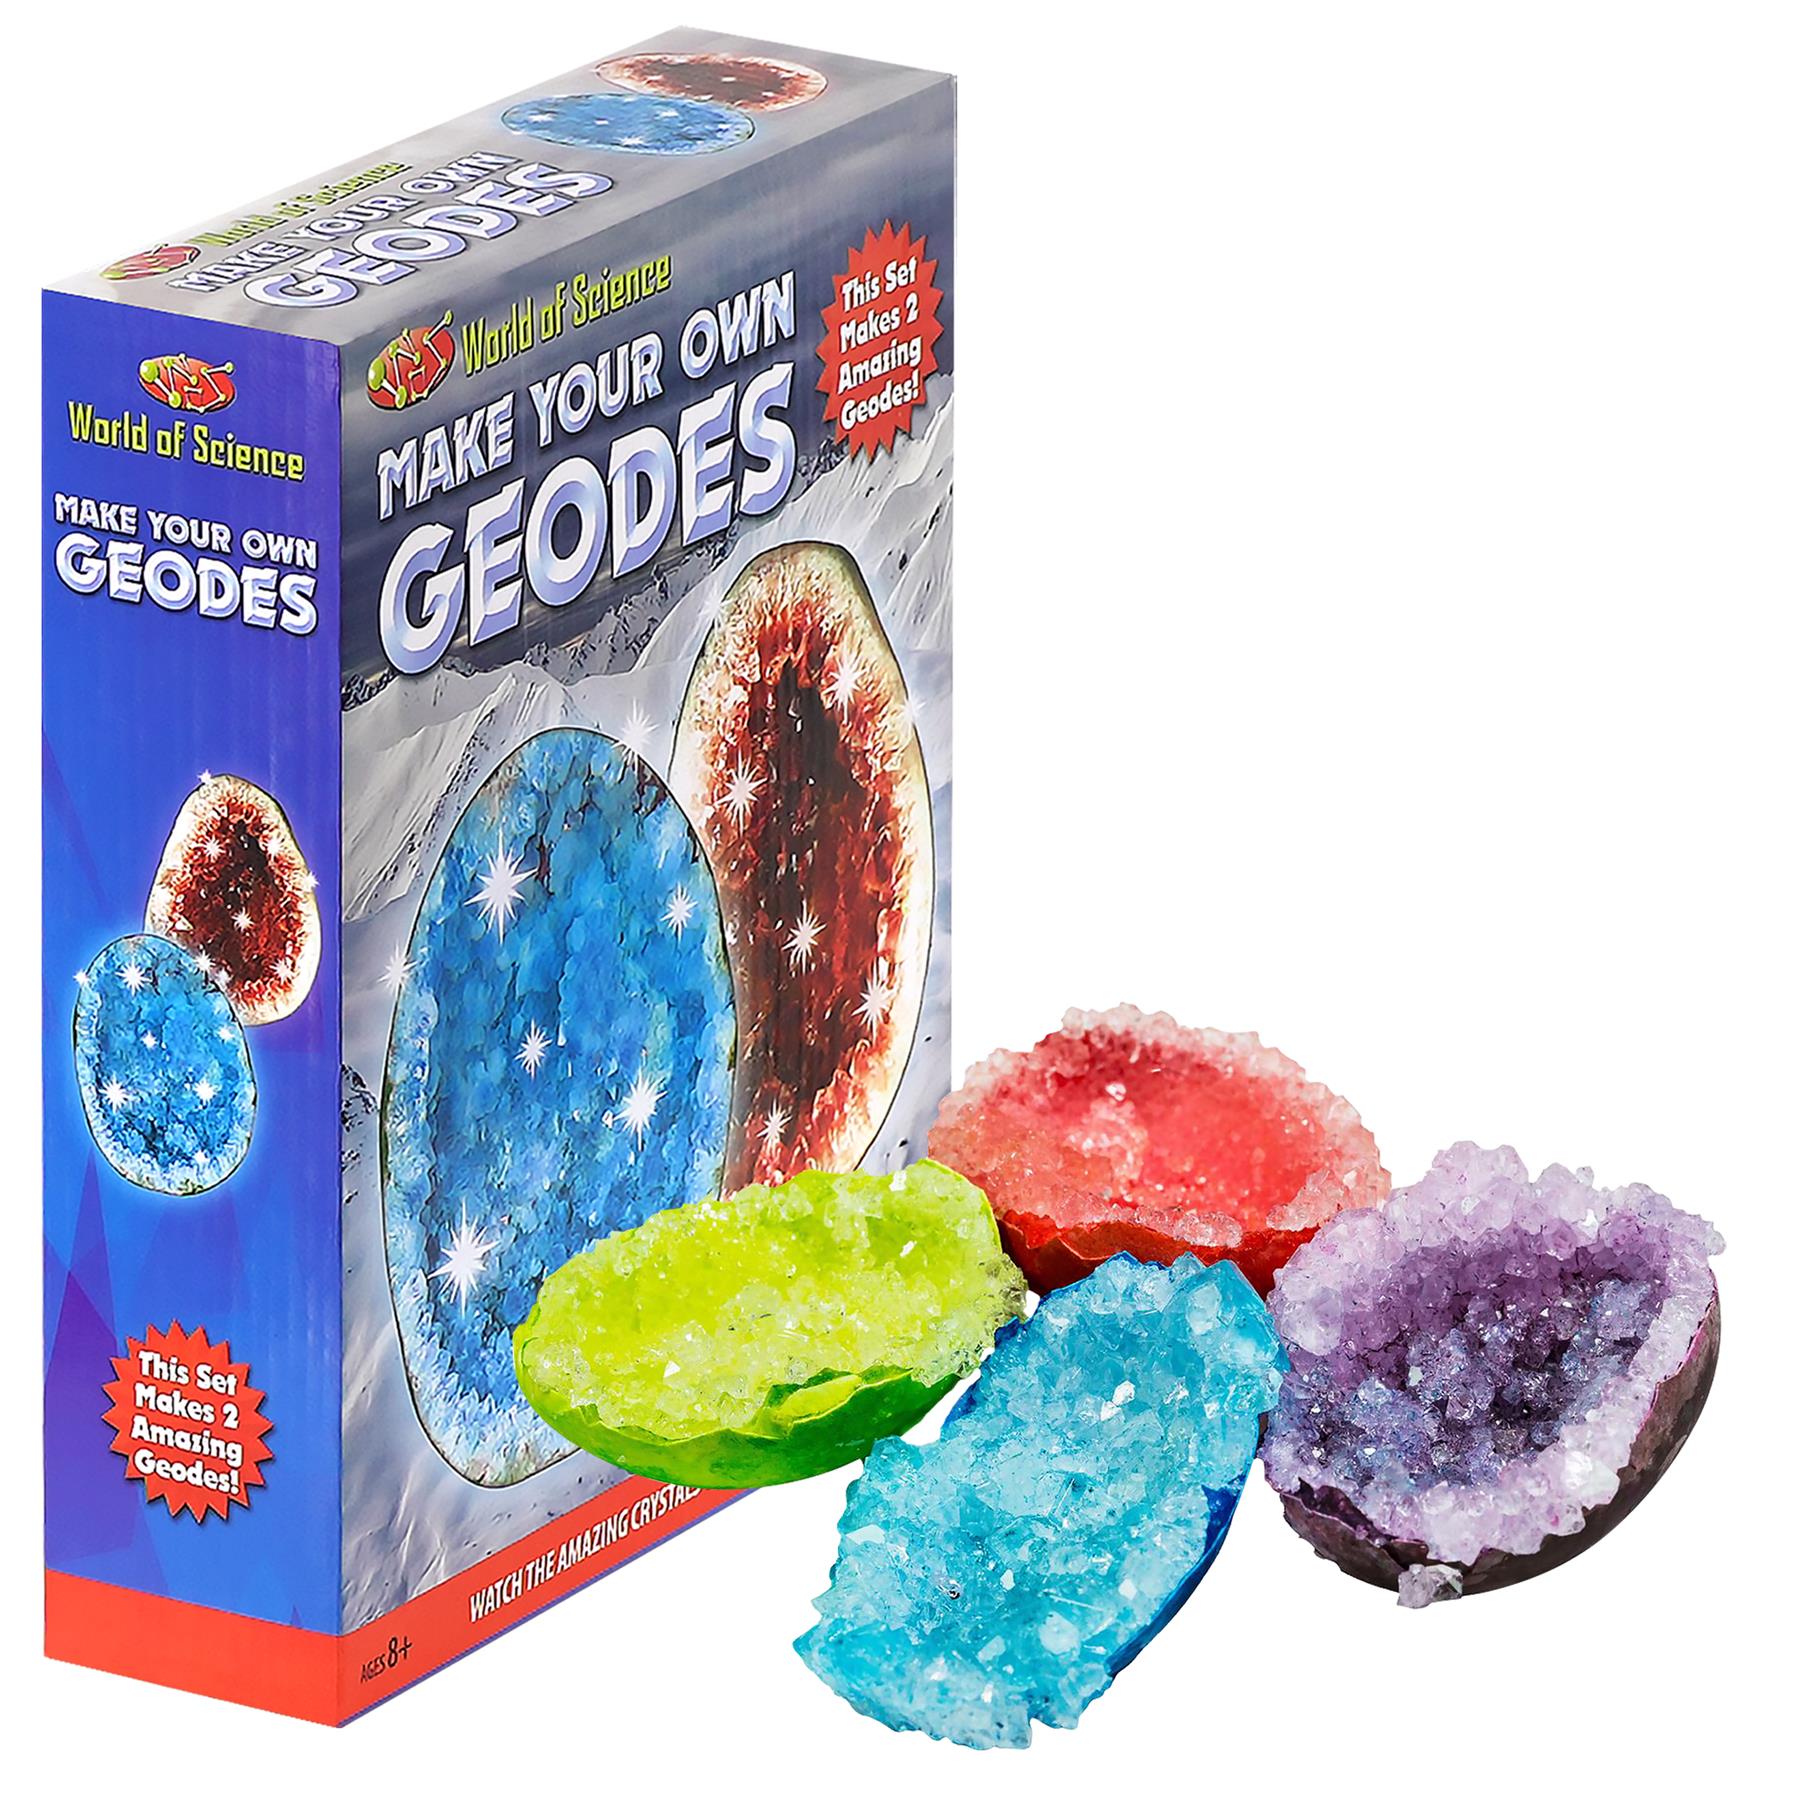 Make Your Own Geodes Science Set by The Magic Toy Shop - The Magic Toy Shop